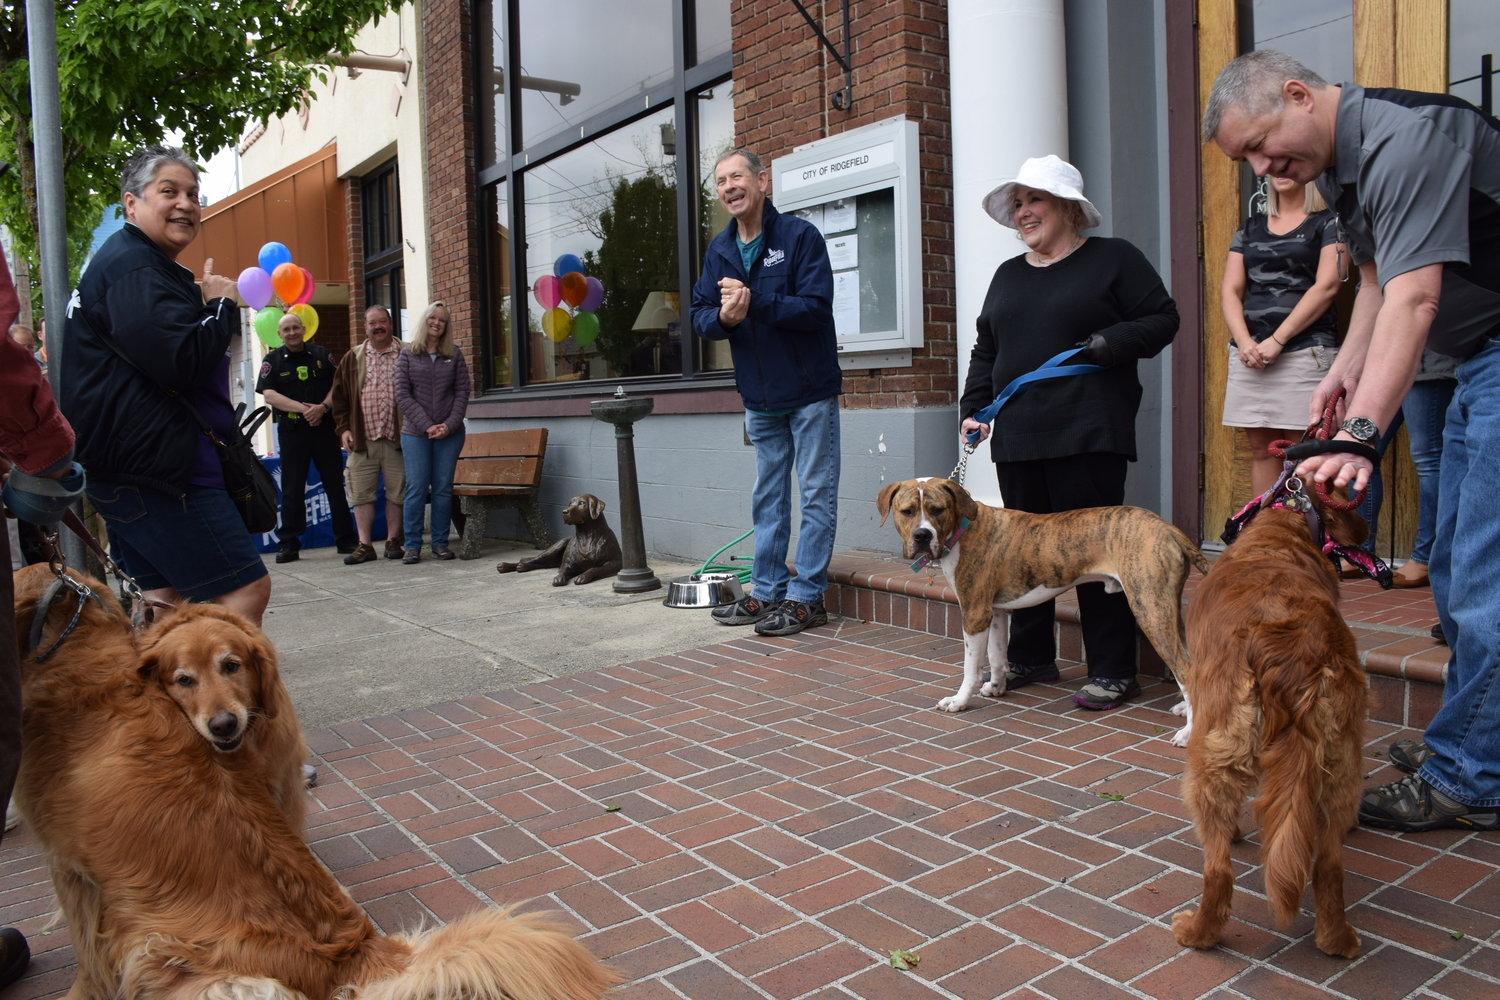 Ridgefield Mayor Don Stose speaks to those gathered, both citizen and canine, for the unveiling of a donated bronze sculpture of a golden retriever donated by former mayor and community leader Tevis Laspa during a ceremony May 4.